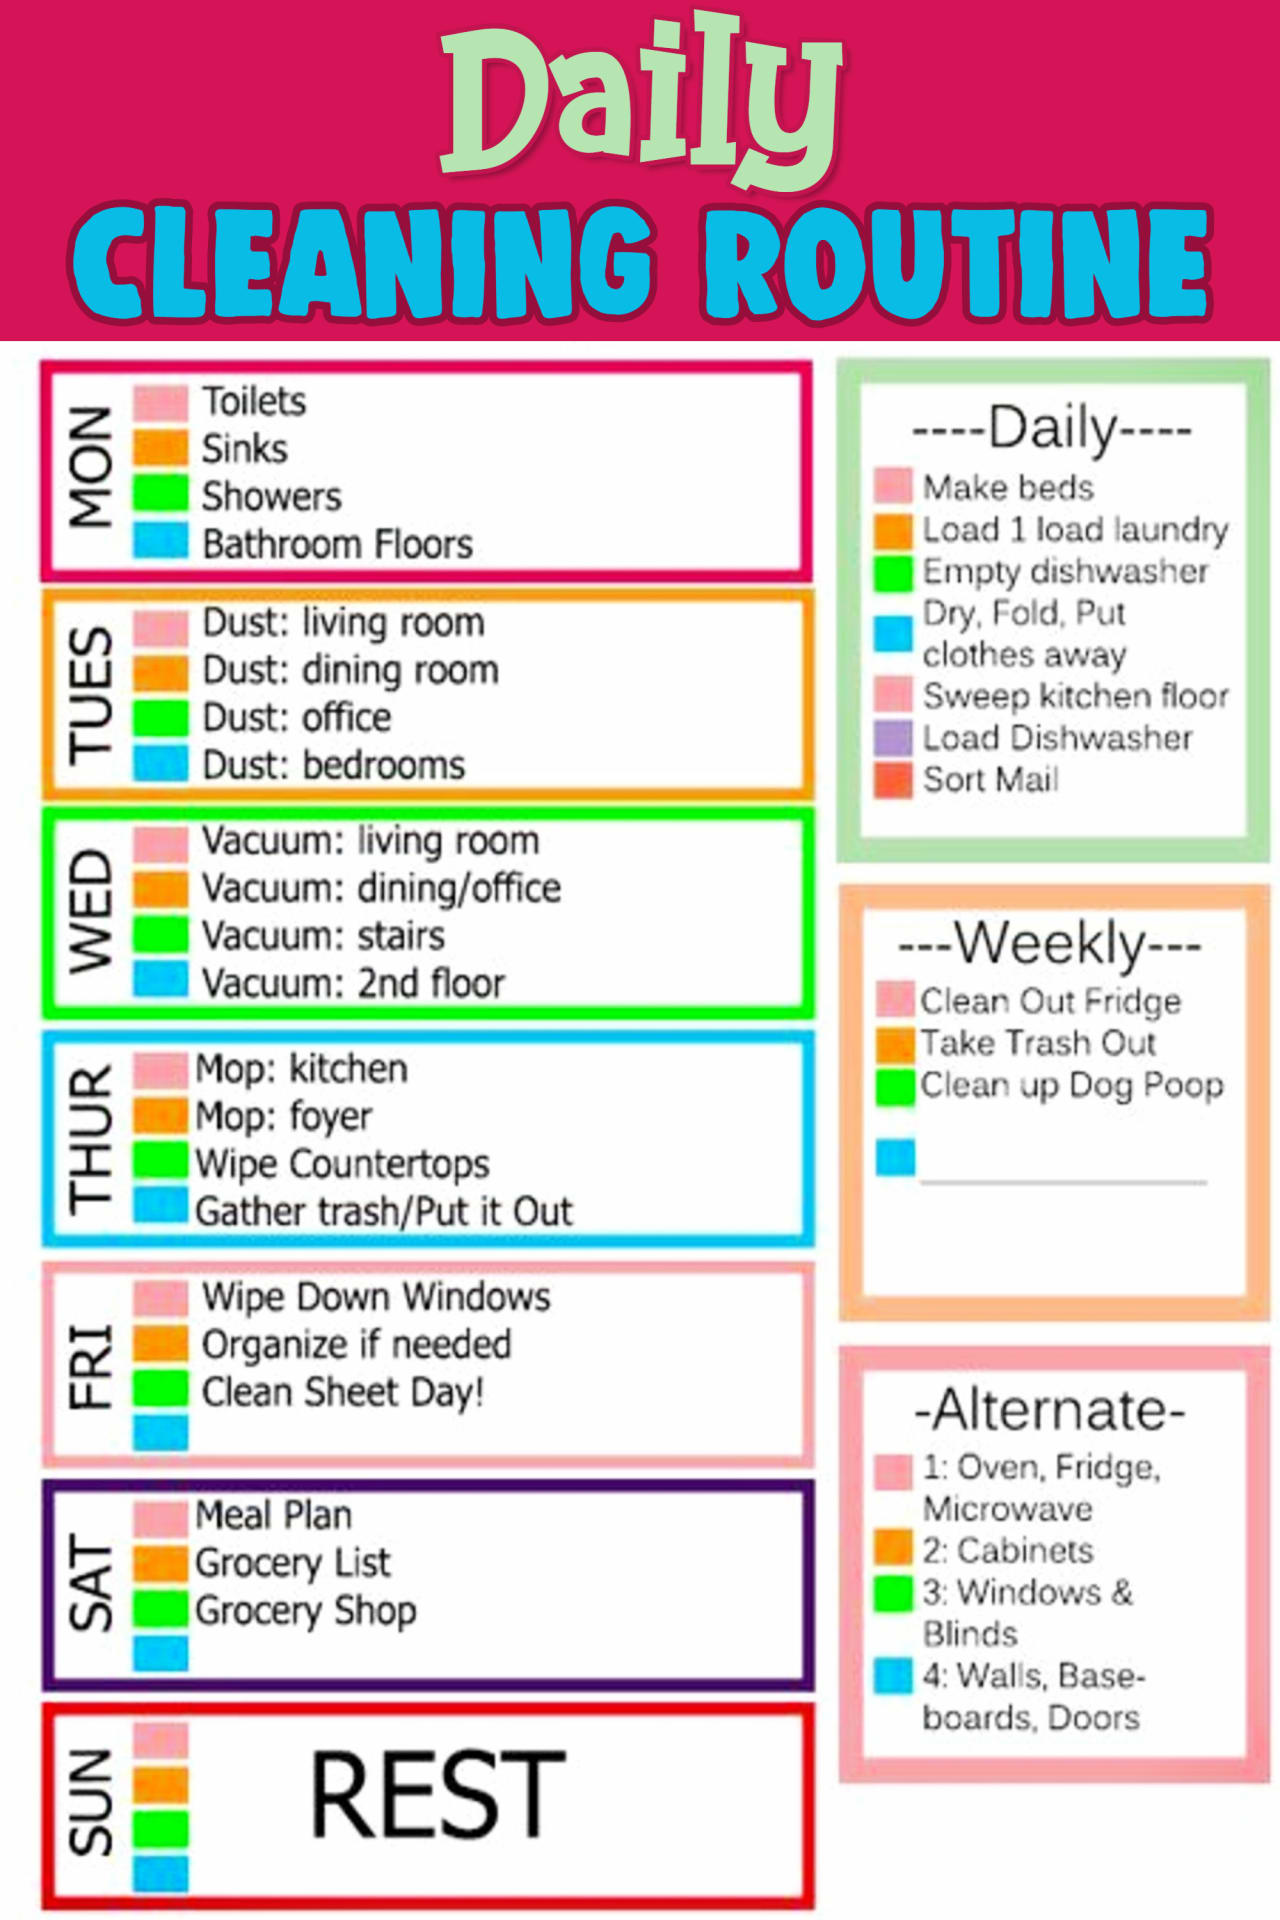 daily cleaning routine checklist -useful list of daily chores to keep your house clean and clutter-free WITHOUT feeling overwhelmed!